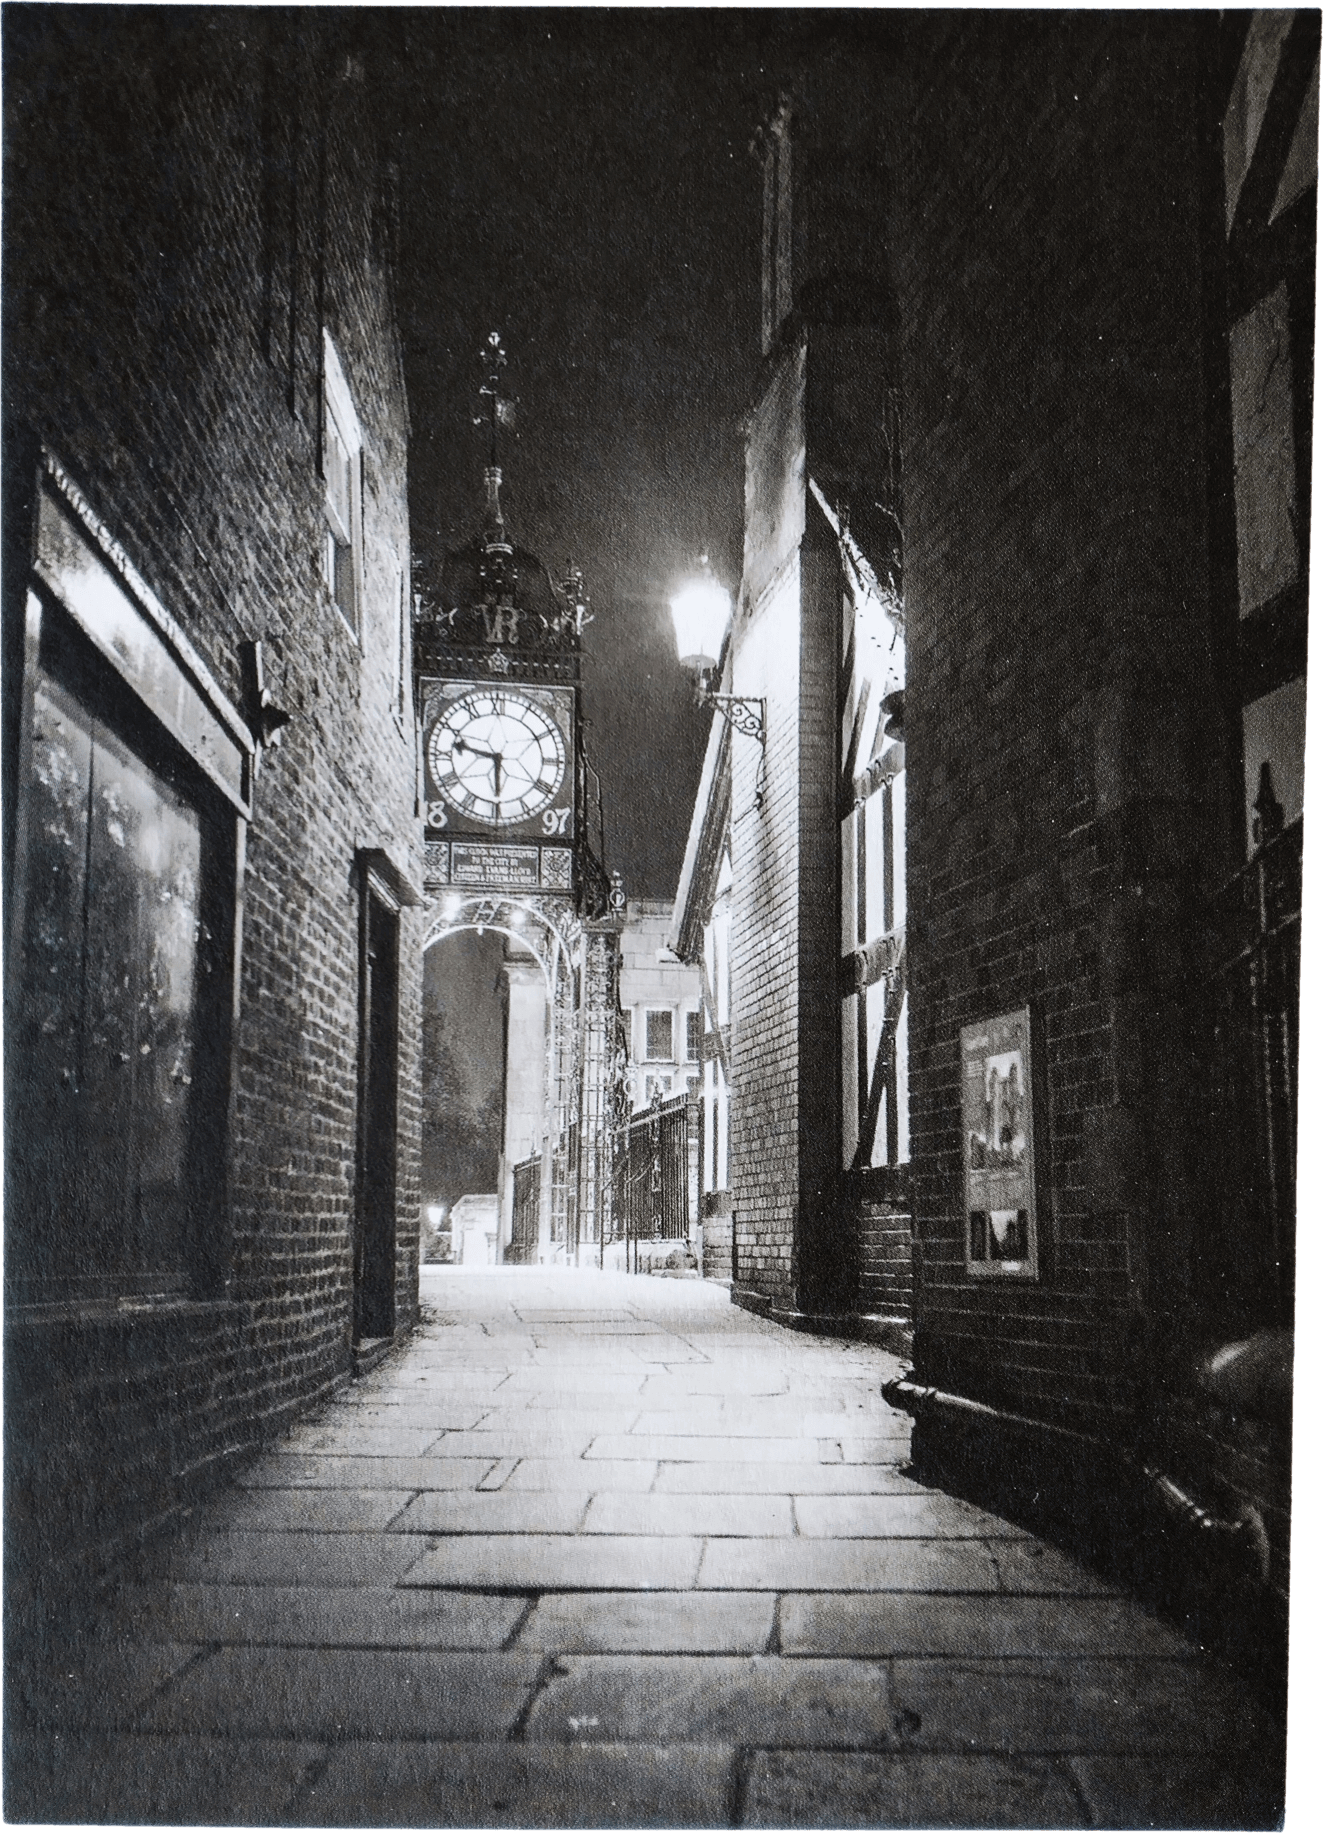 A an old city street at night and a clock